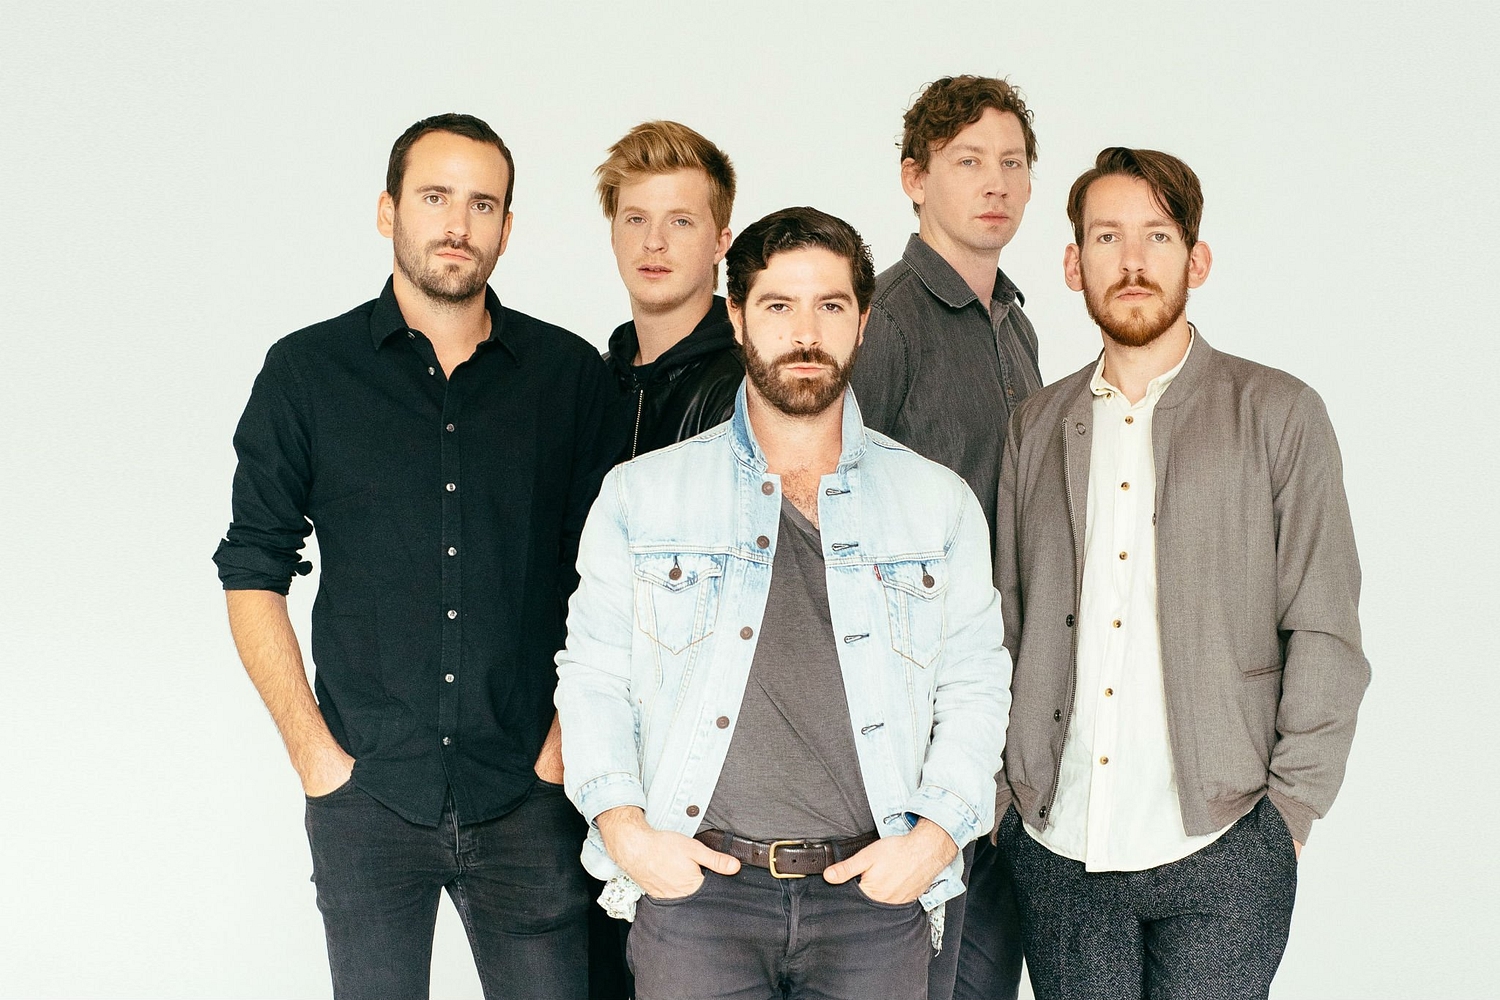 Foals tease new album, share snippet of new music